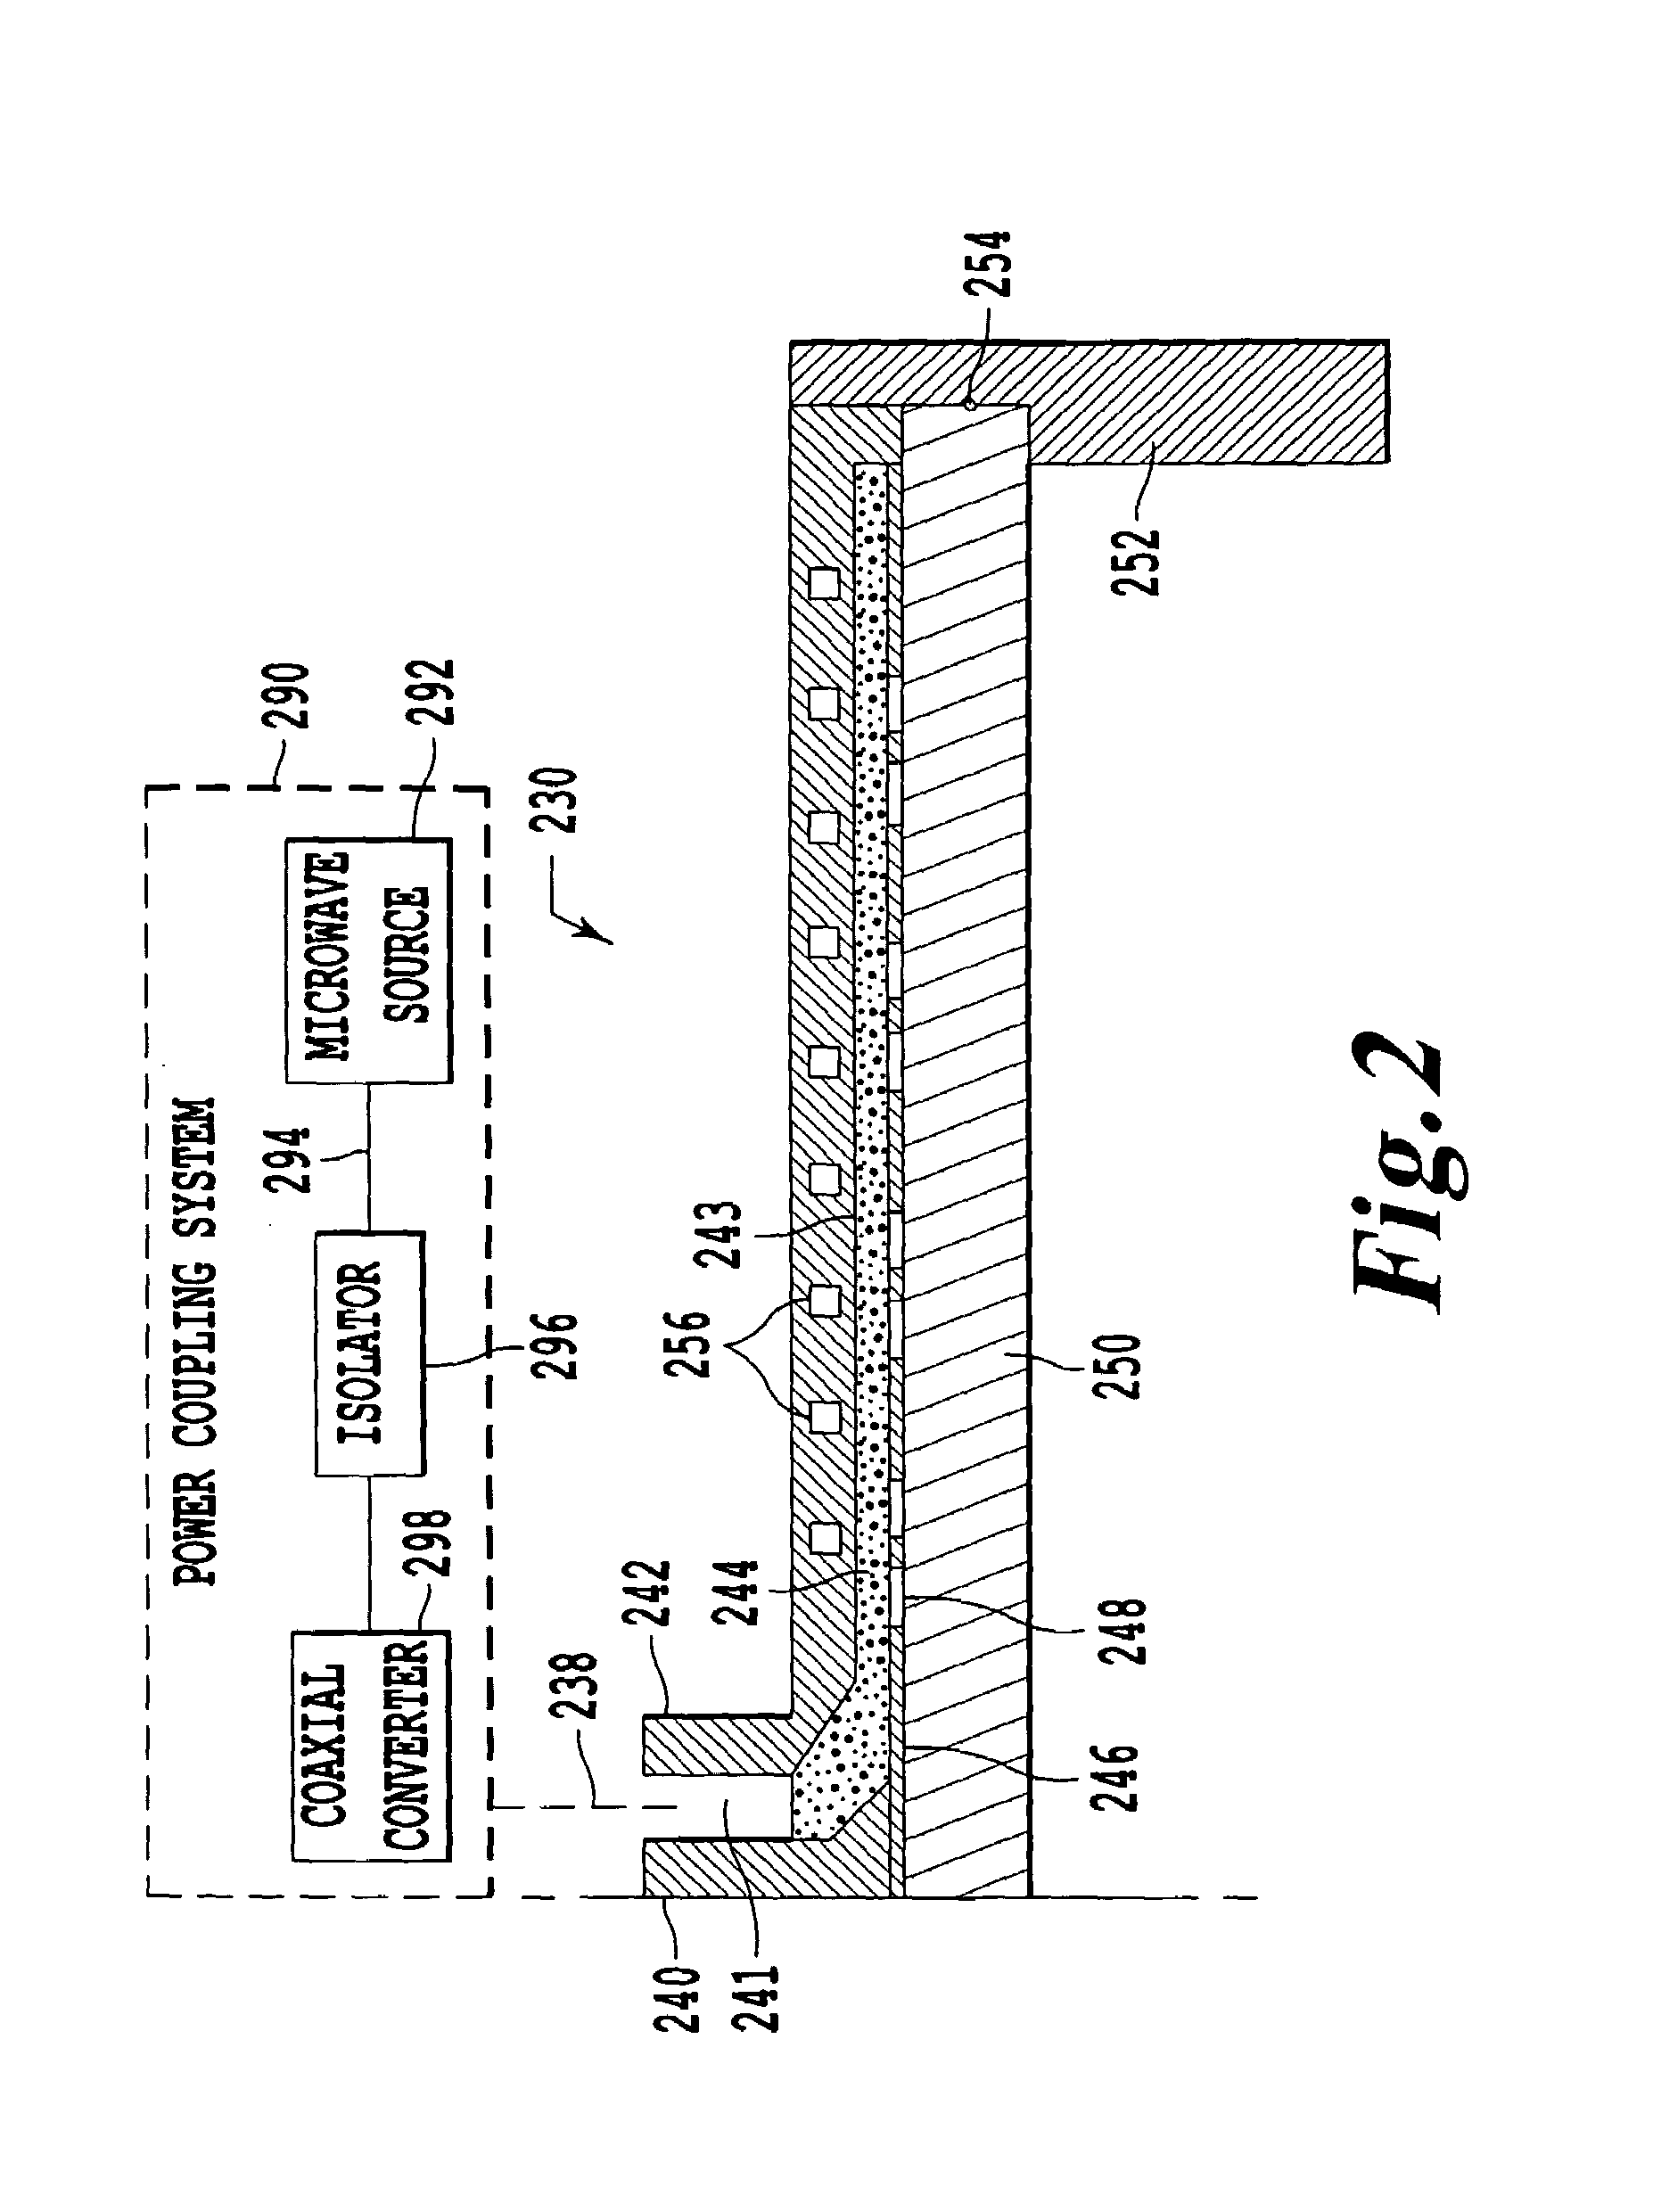 Surface wave plasma processing system and method of using